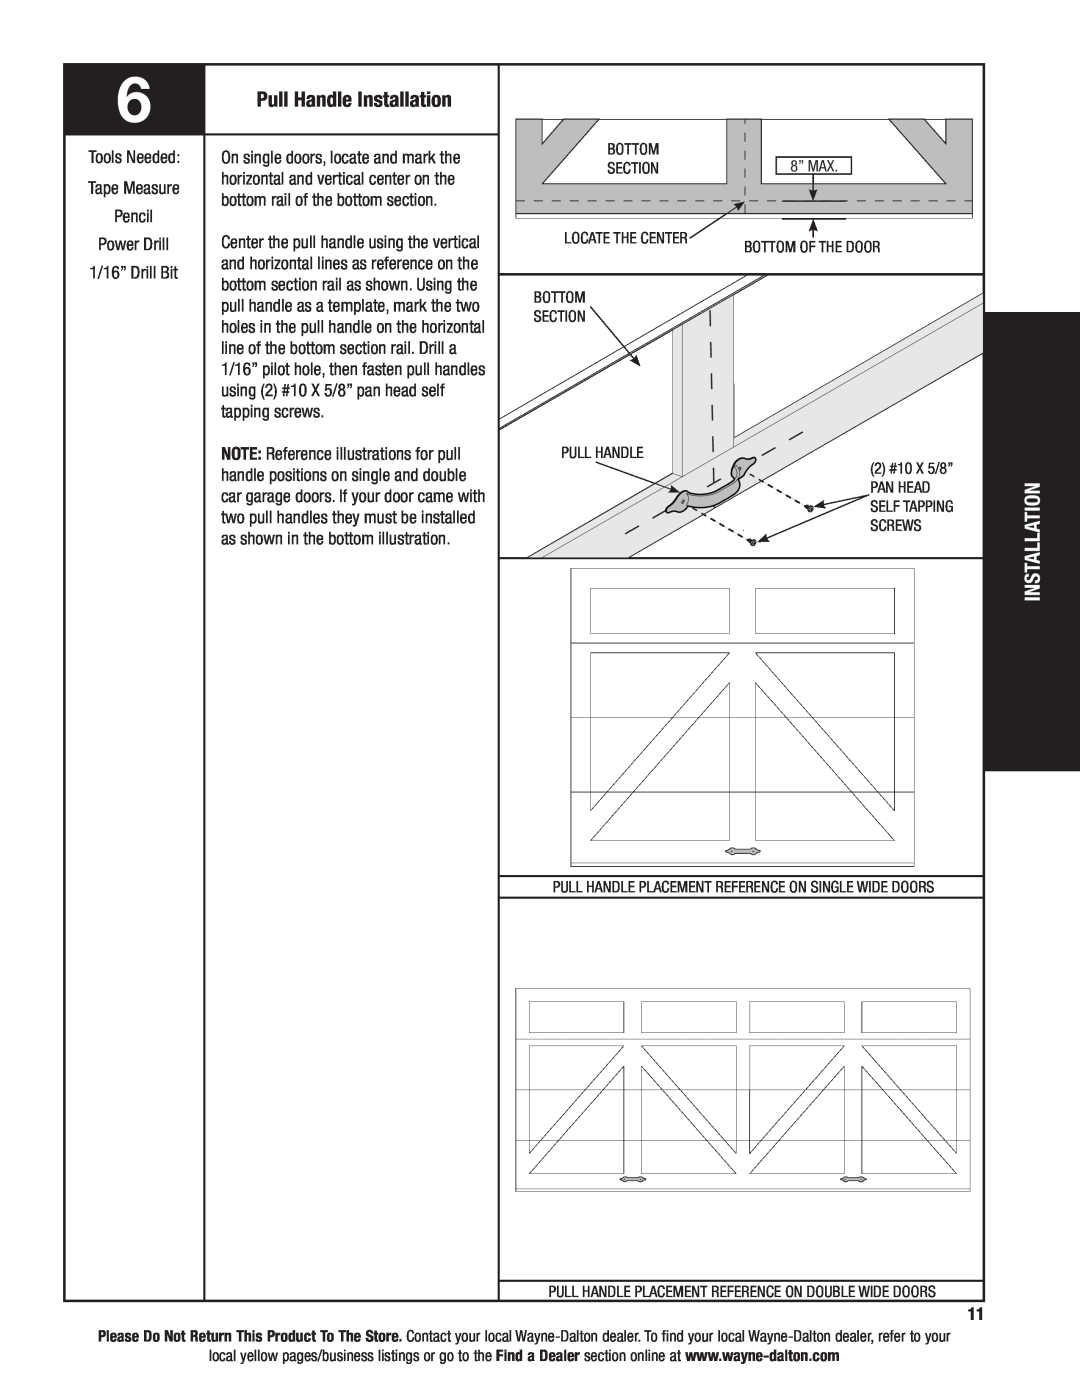 Wayne-Dalton 6100 Pull Handle Installation, horizontal and vertical center on the, bottom rail of the bottom section 